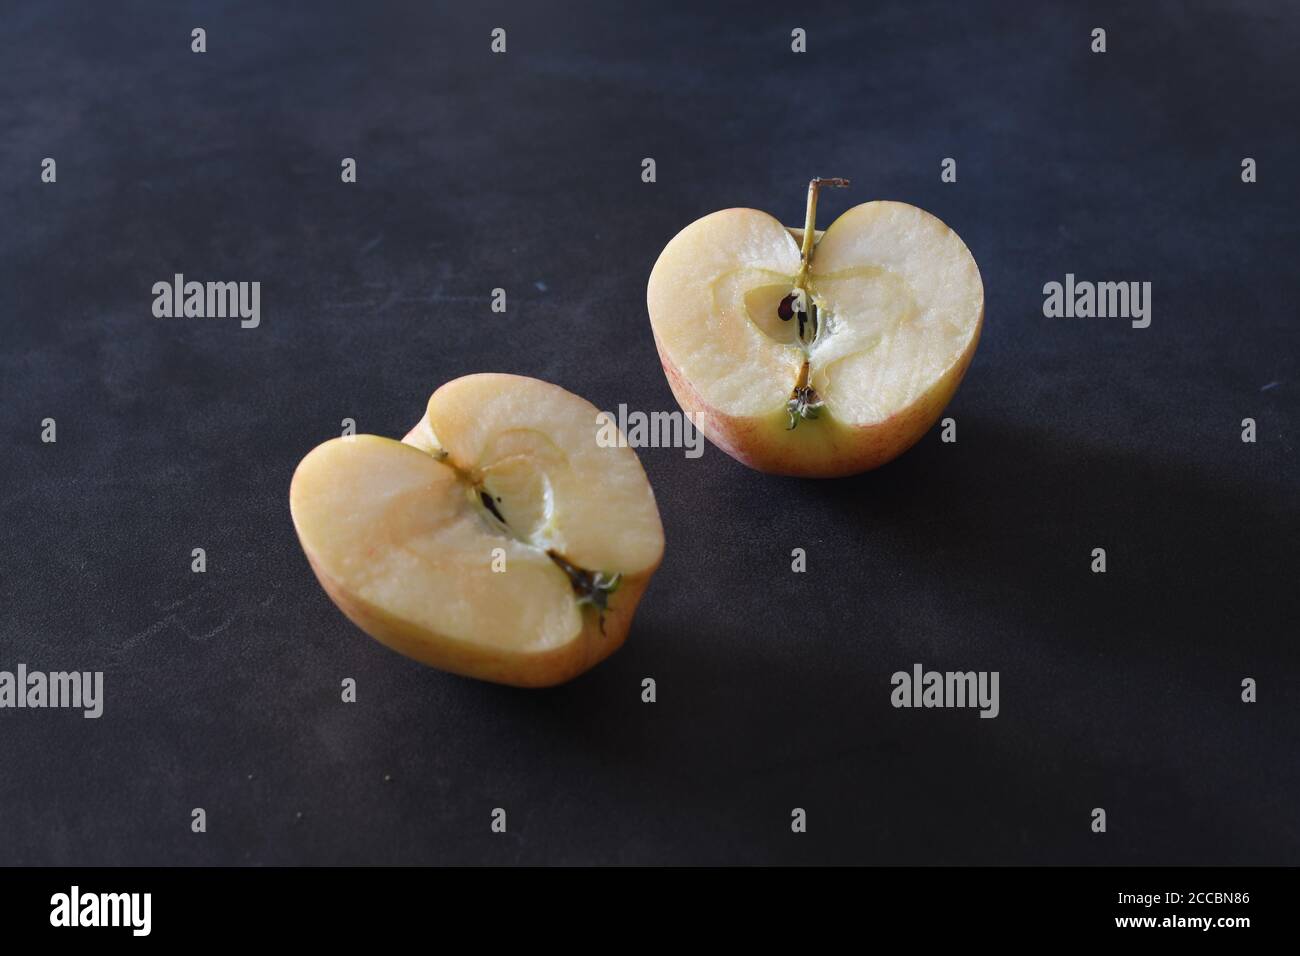 Small apple cut in two halves over a blackboard background Stock Photo